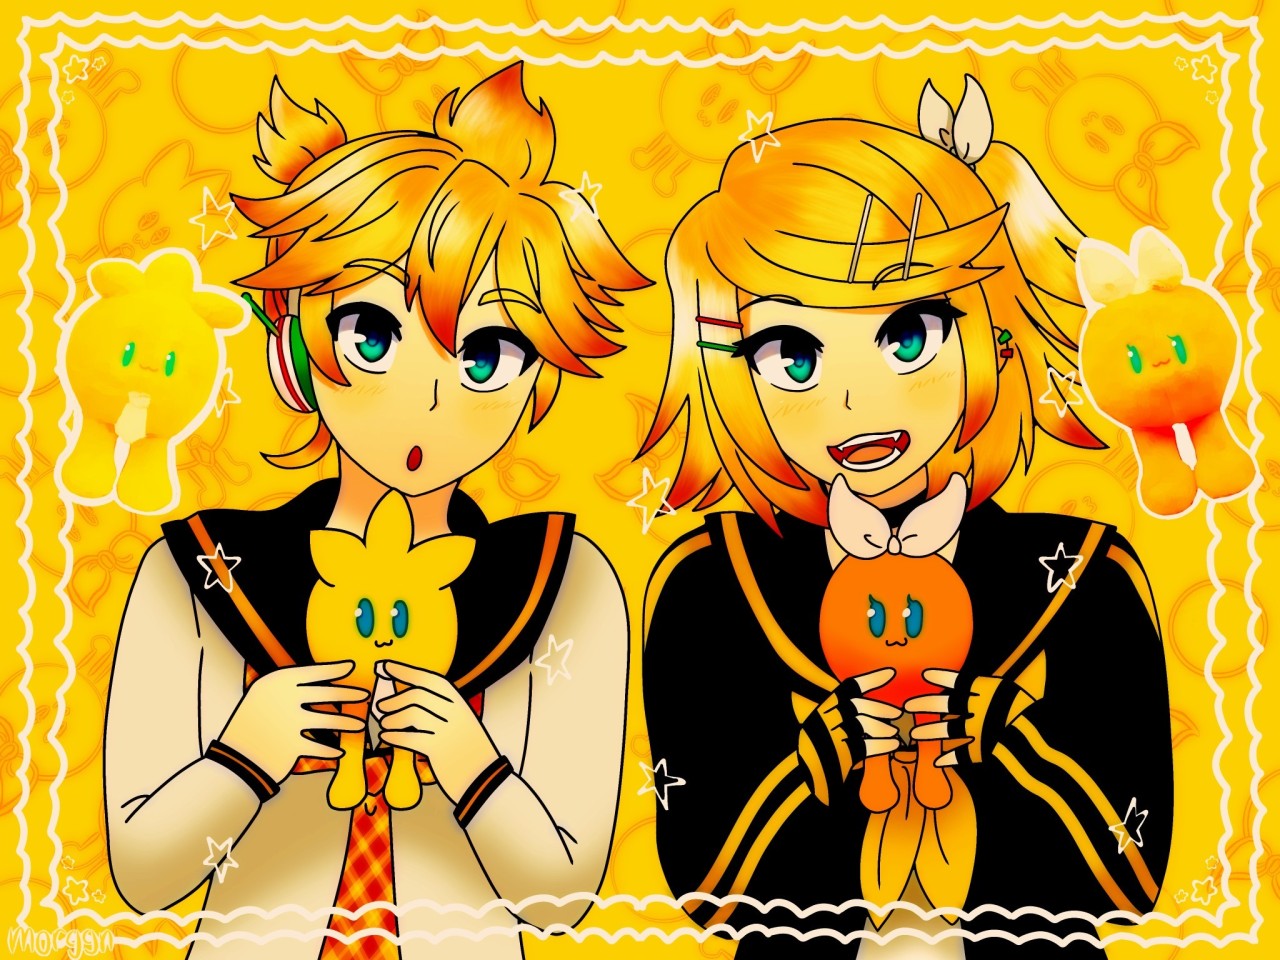 Rin and Len, holding small round plushes with little legs, Rin with an orange one with a bow, and Len with a yellow one with fringe resembling his and a white tie